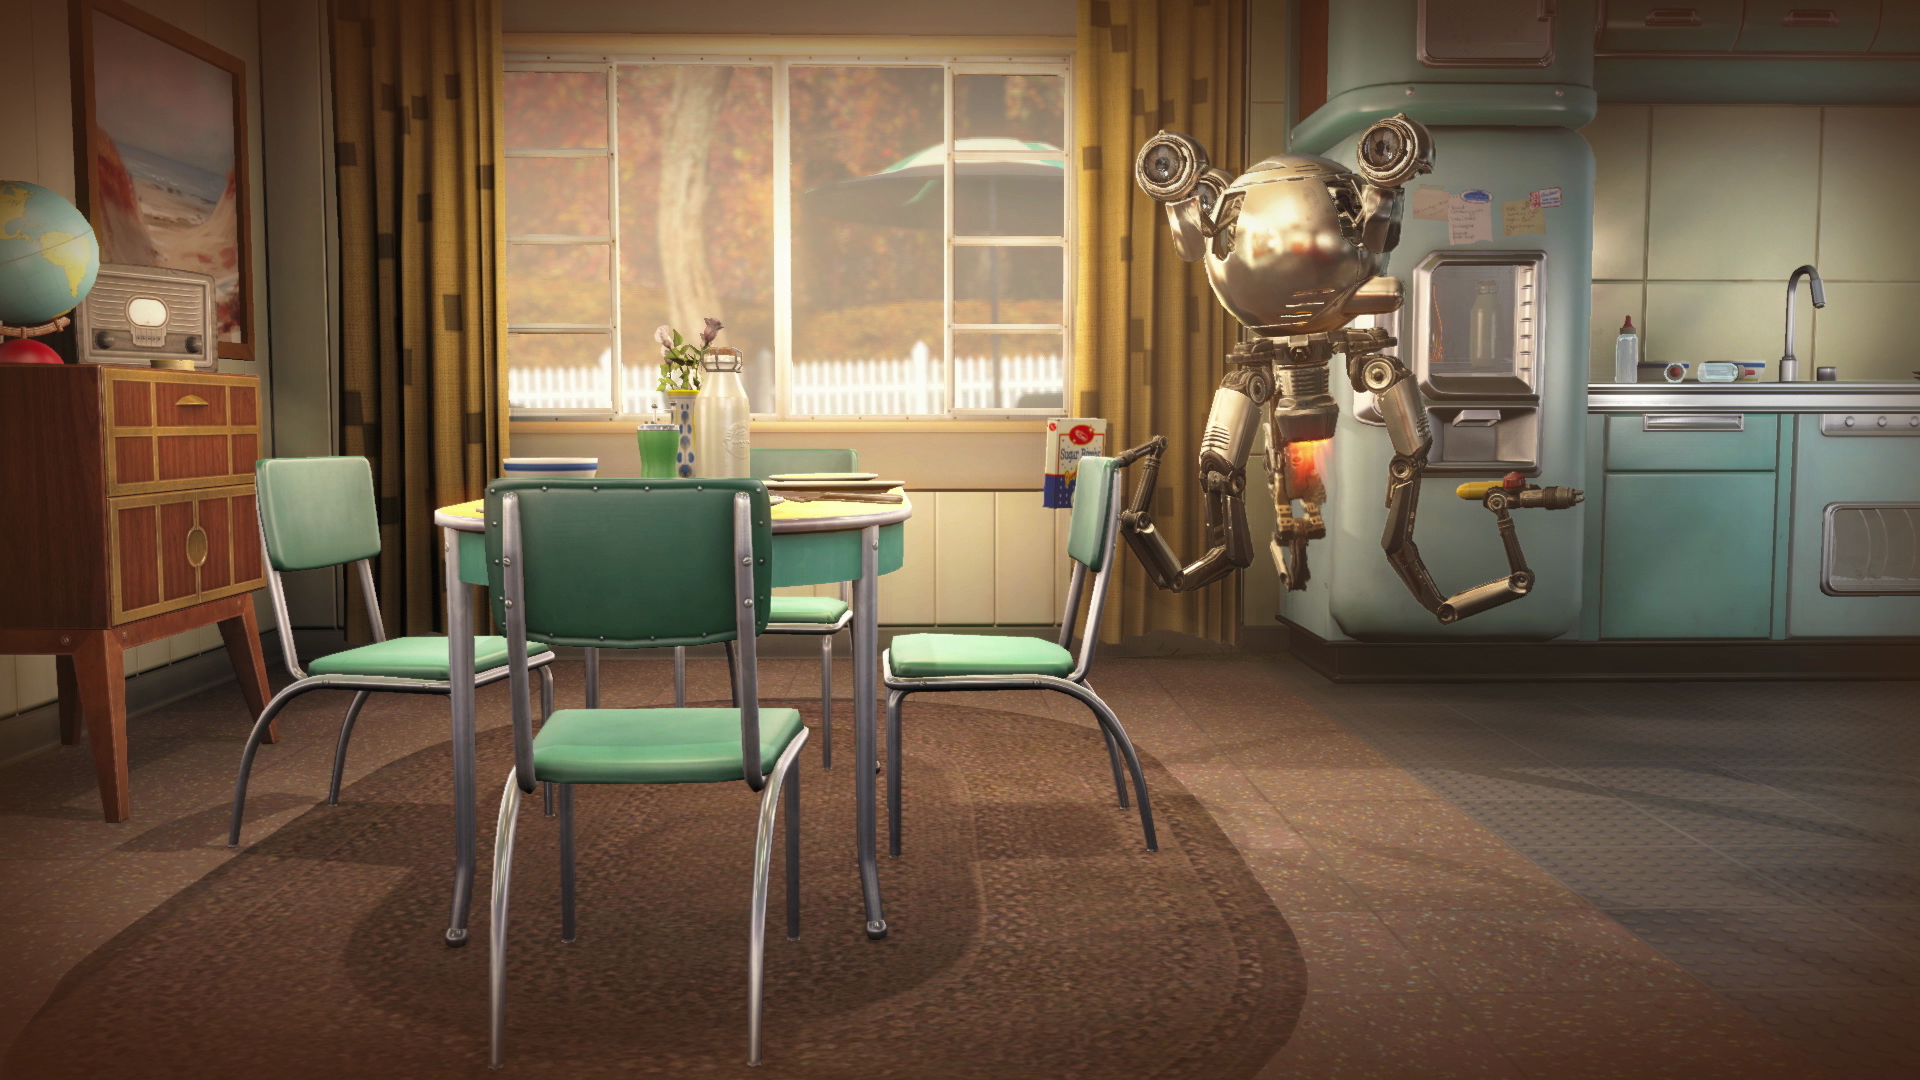 Media asset in full size related to 3dfxzone.it news item entitled as follows: Primi trailer e screenshot ufficiali in Full HD del game Fallout 4 di Bethesda | Image Name: news22682_Bethesda-Fallout-4-screenshot_1.png